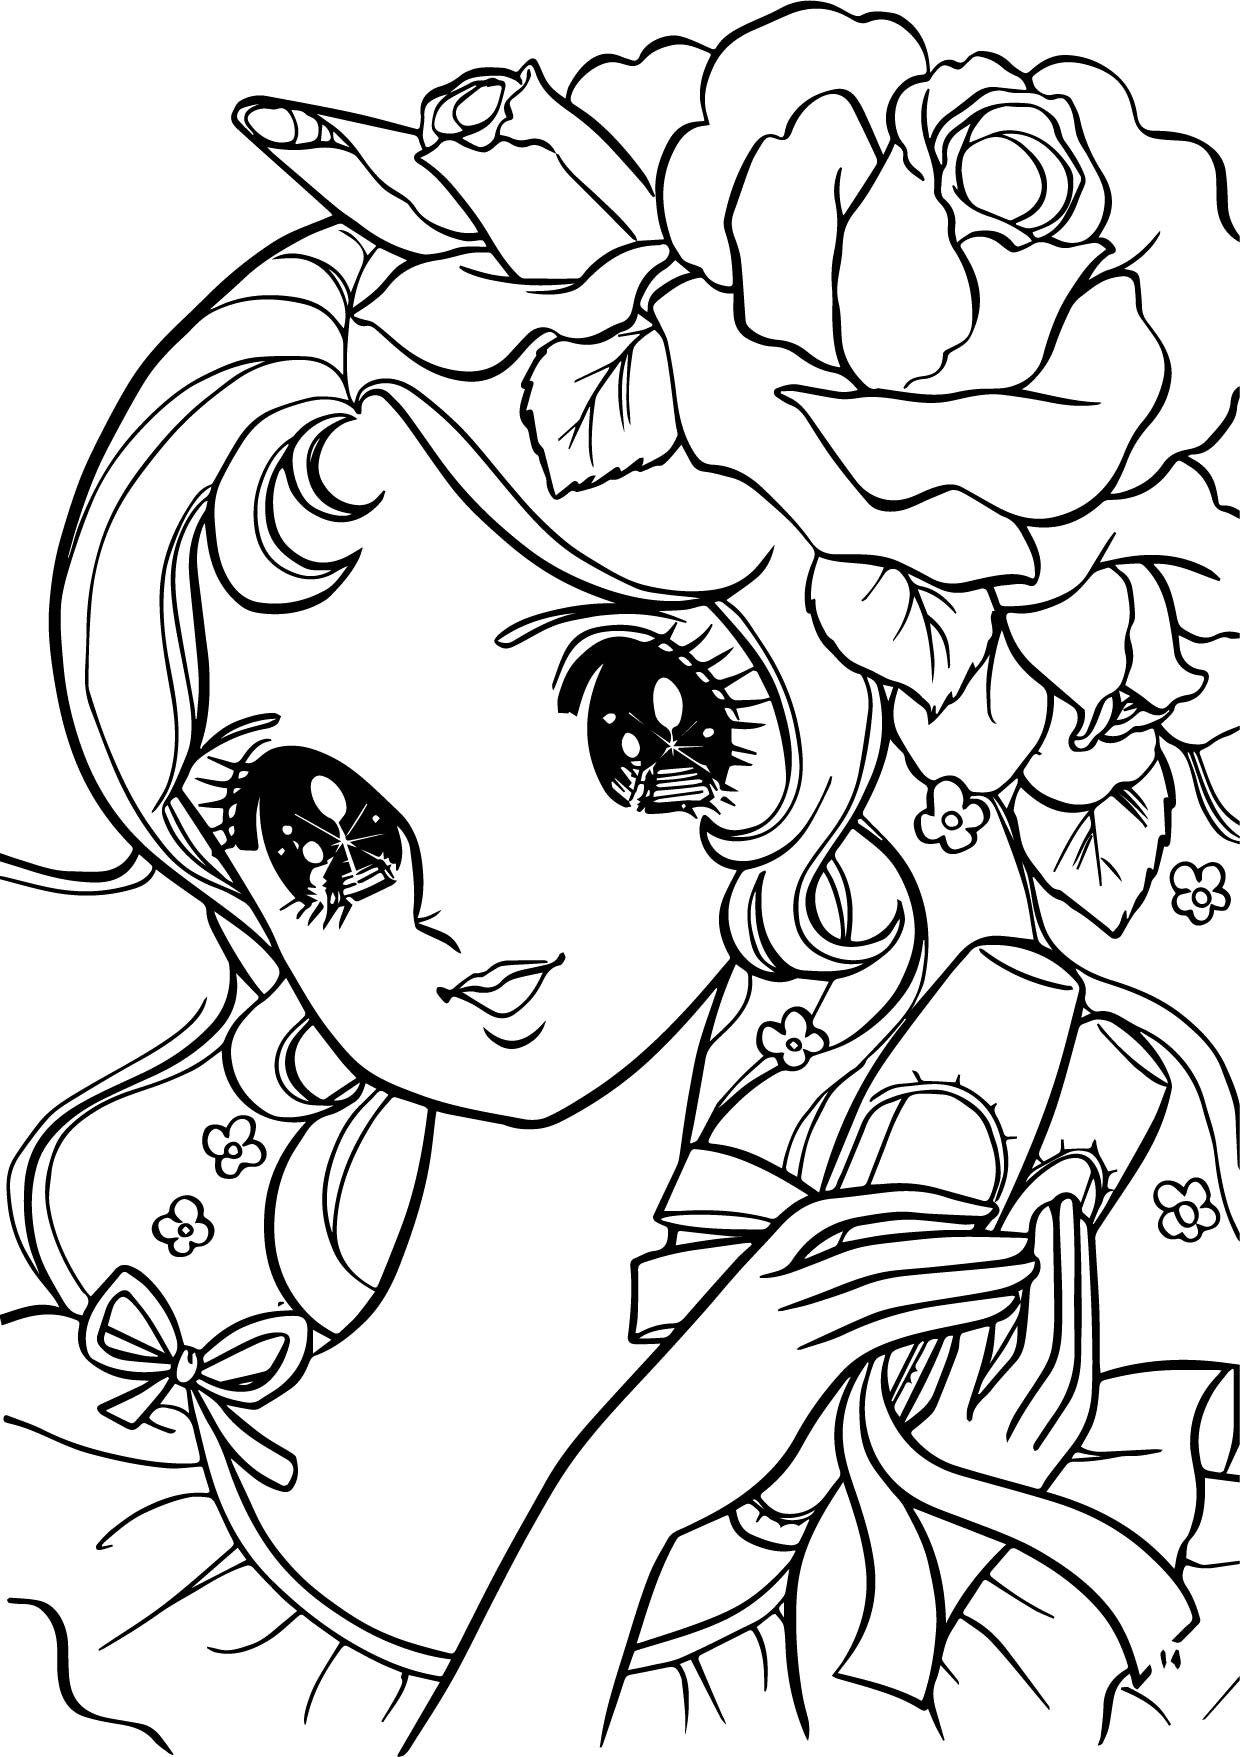 Free Coloring Pages For Girls Flowers
 Aeromachia Girl Flower Hair Coloring Pages